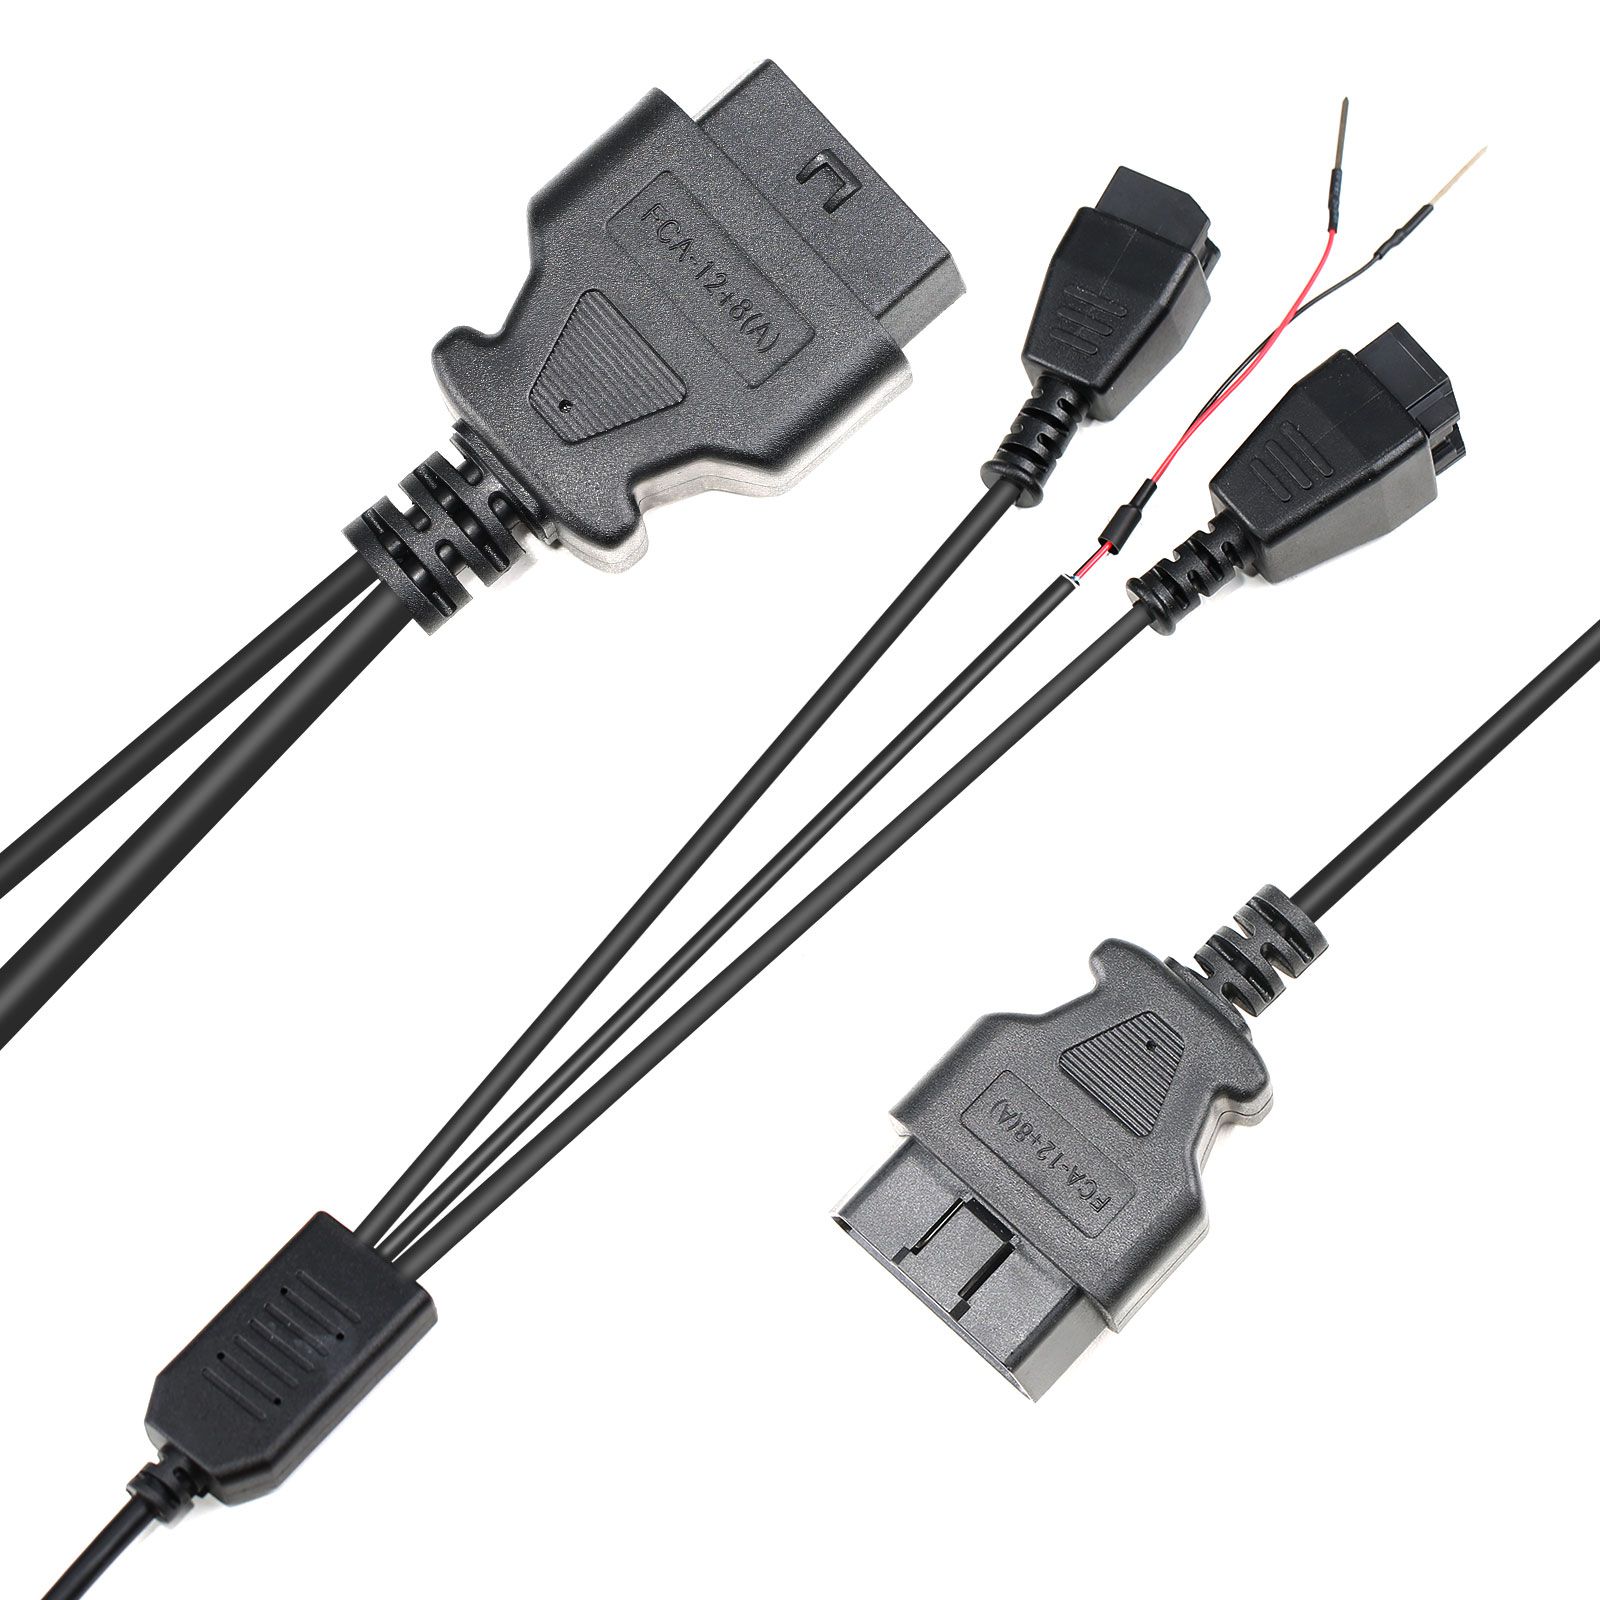 OBDSTAR FCA 12+8 Cable for Chrysler Work on X300 DP Plus/X300 PRO4/OdoMaster/X200 PRO2